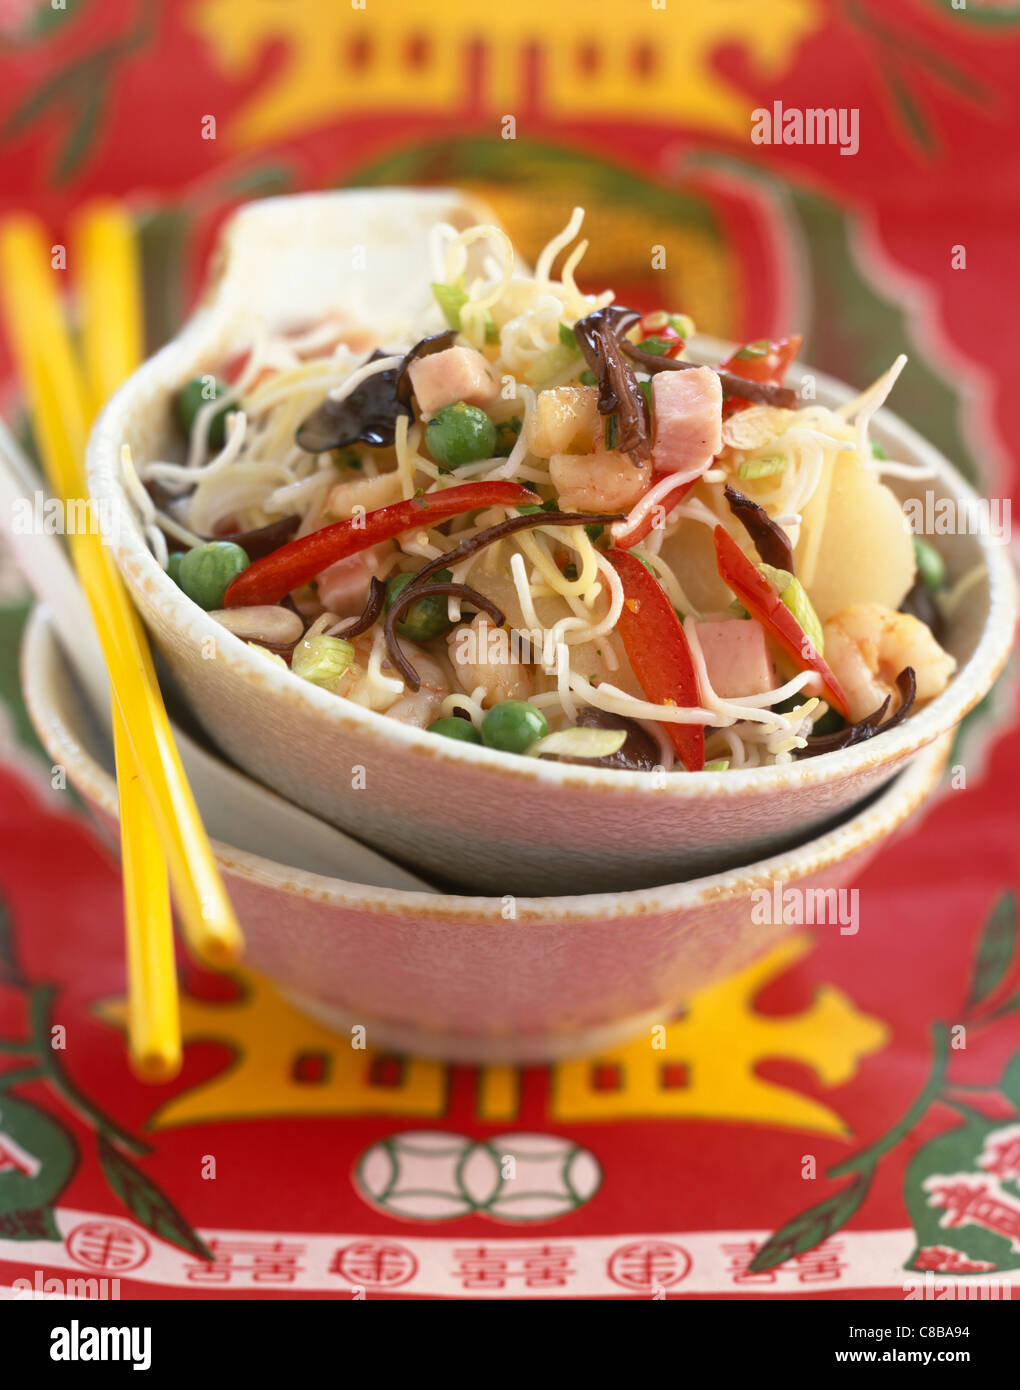 sauteed noodles with vegetables Stock Photo